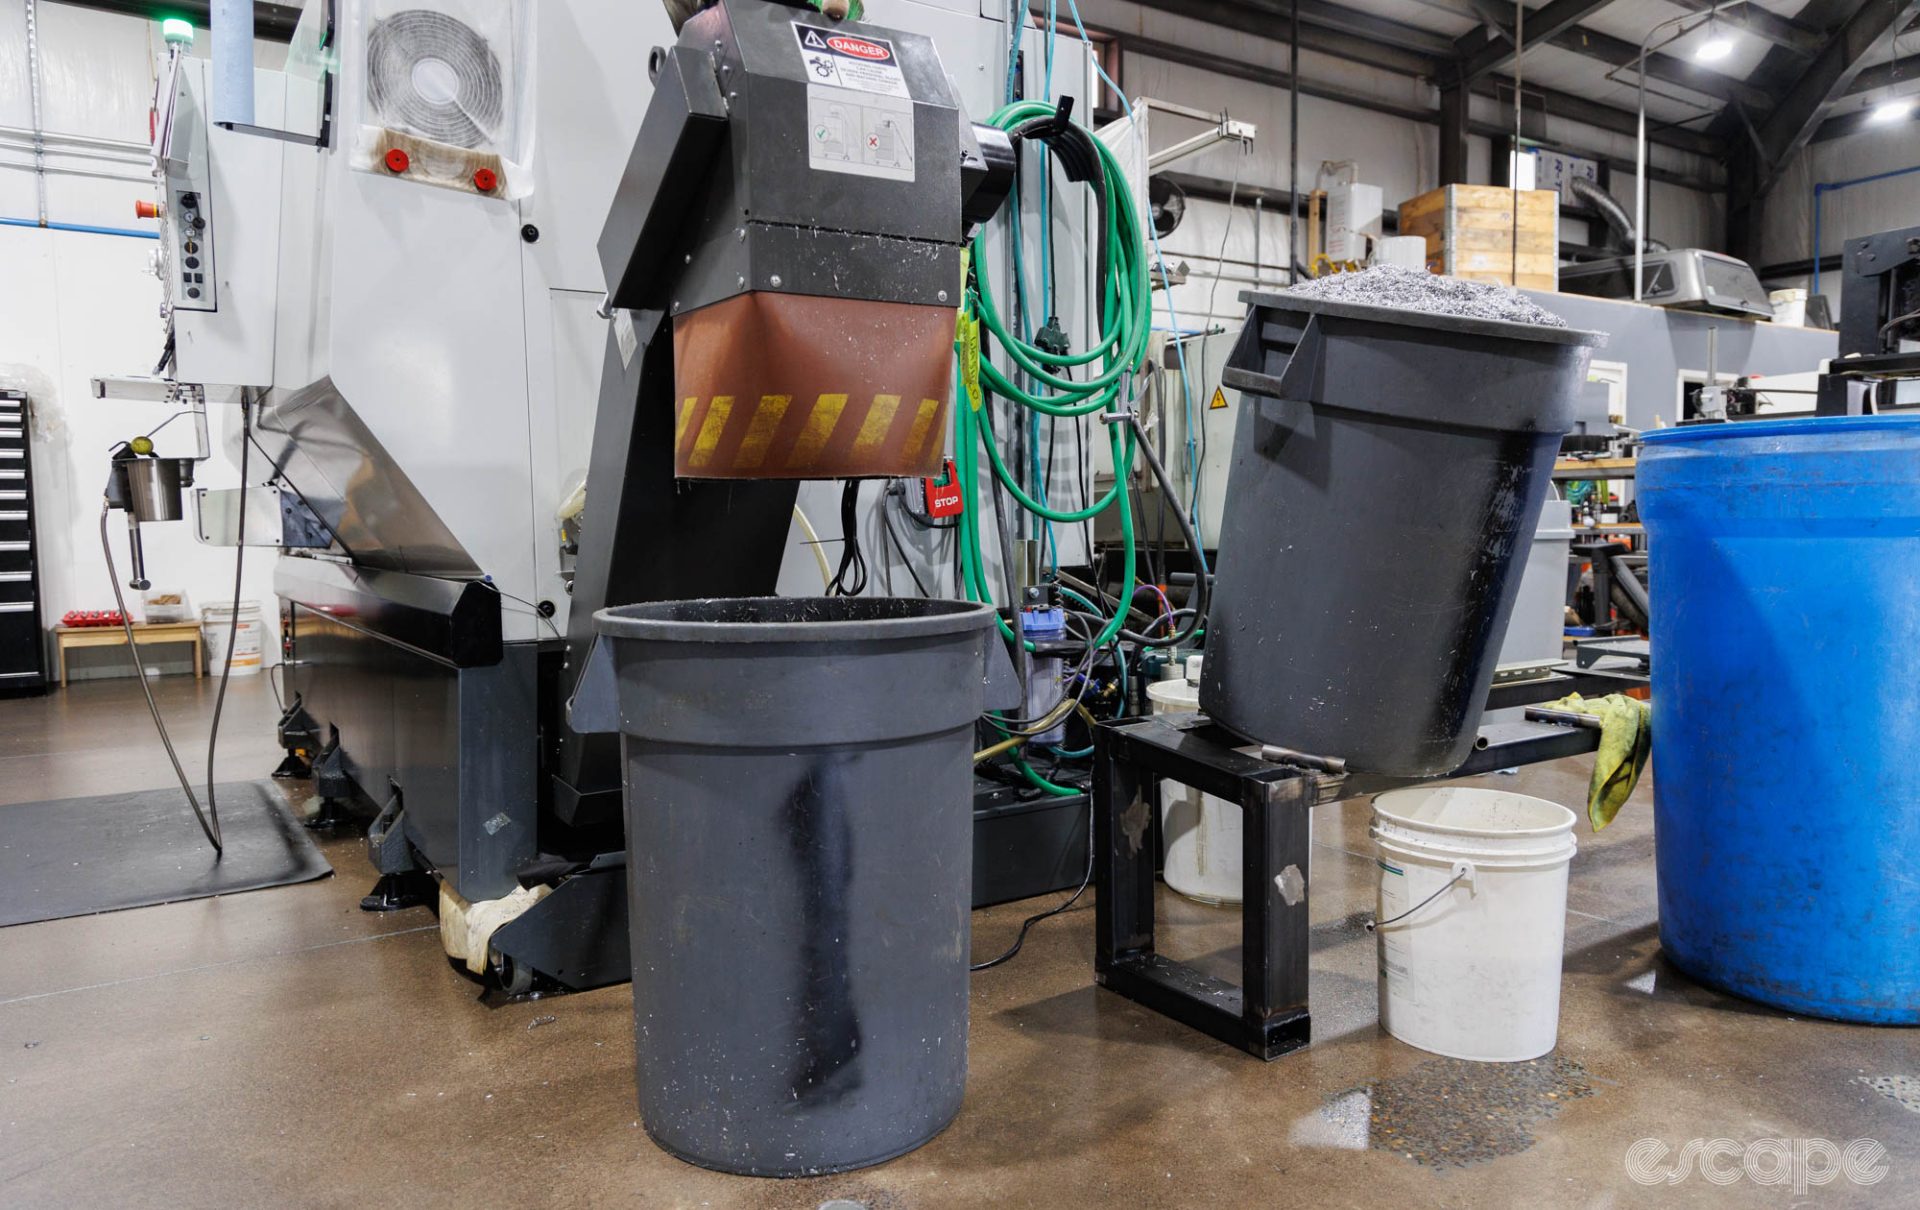 Two large trash cans sit next to the CNC mill. One is piled high with aluminum shavings. The other sits below a chute to catch more.